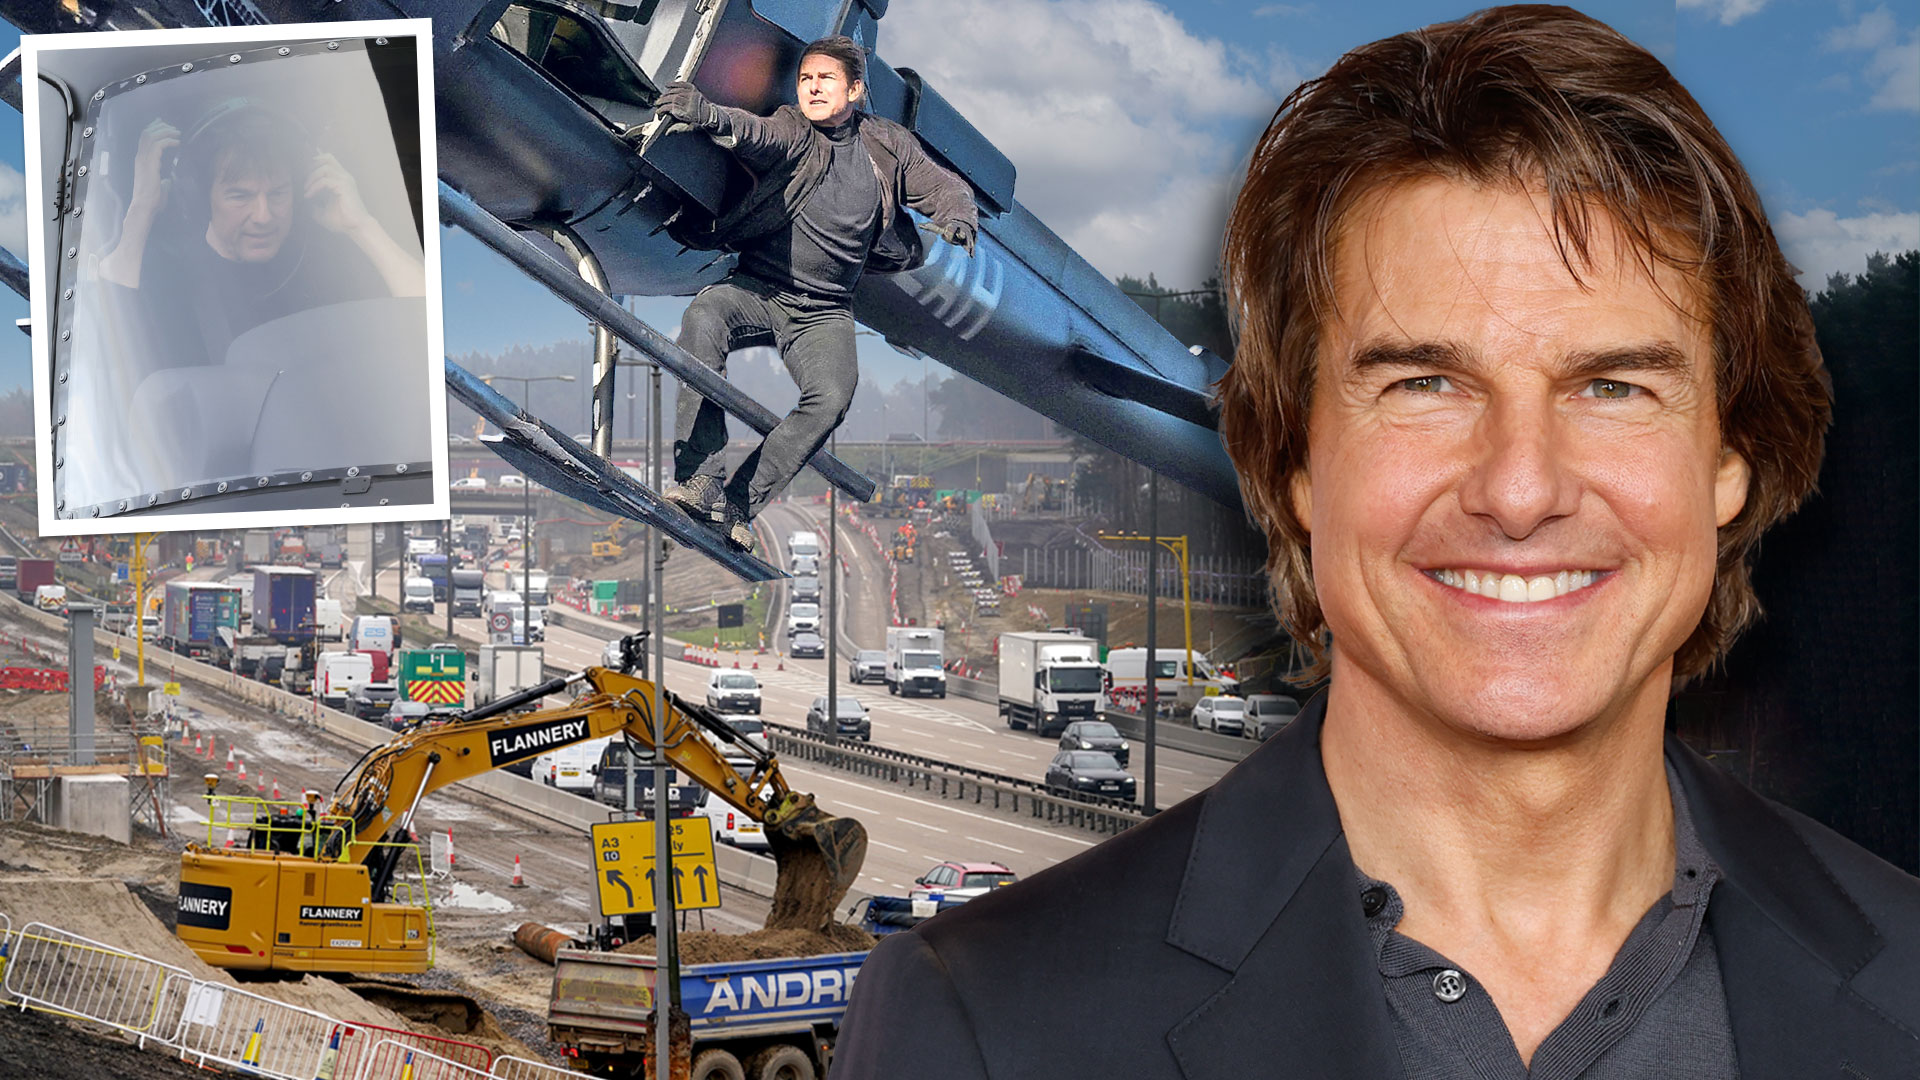 Tom Cruise’s daring helicopter stunt on closed M25 for Mission Impossible 8 leaves cast and crew in awe